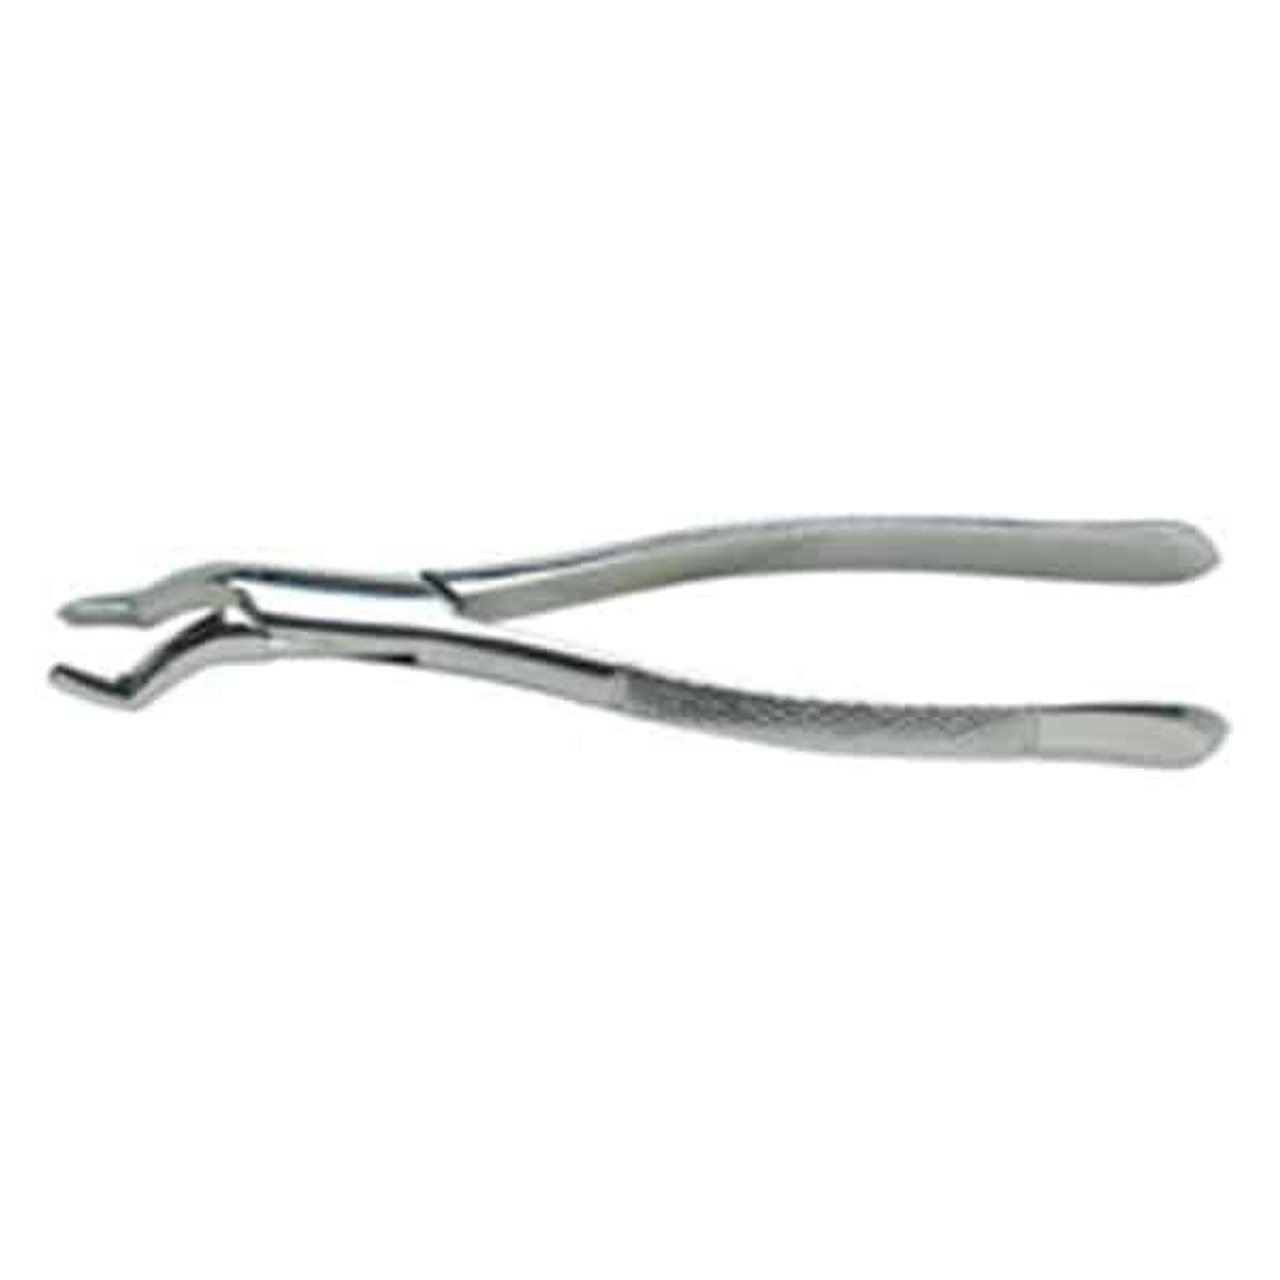 Nordent - Surgical Extracting Forceps 53L Upper Molars Left Stainless Steel